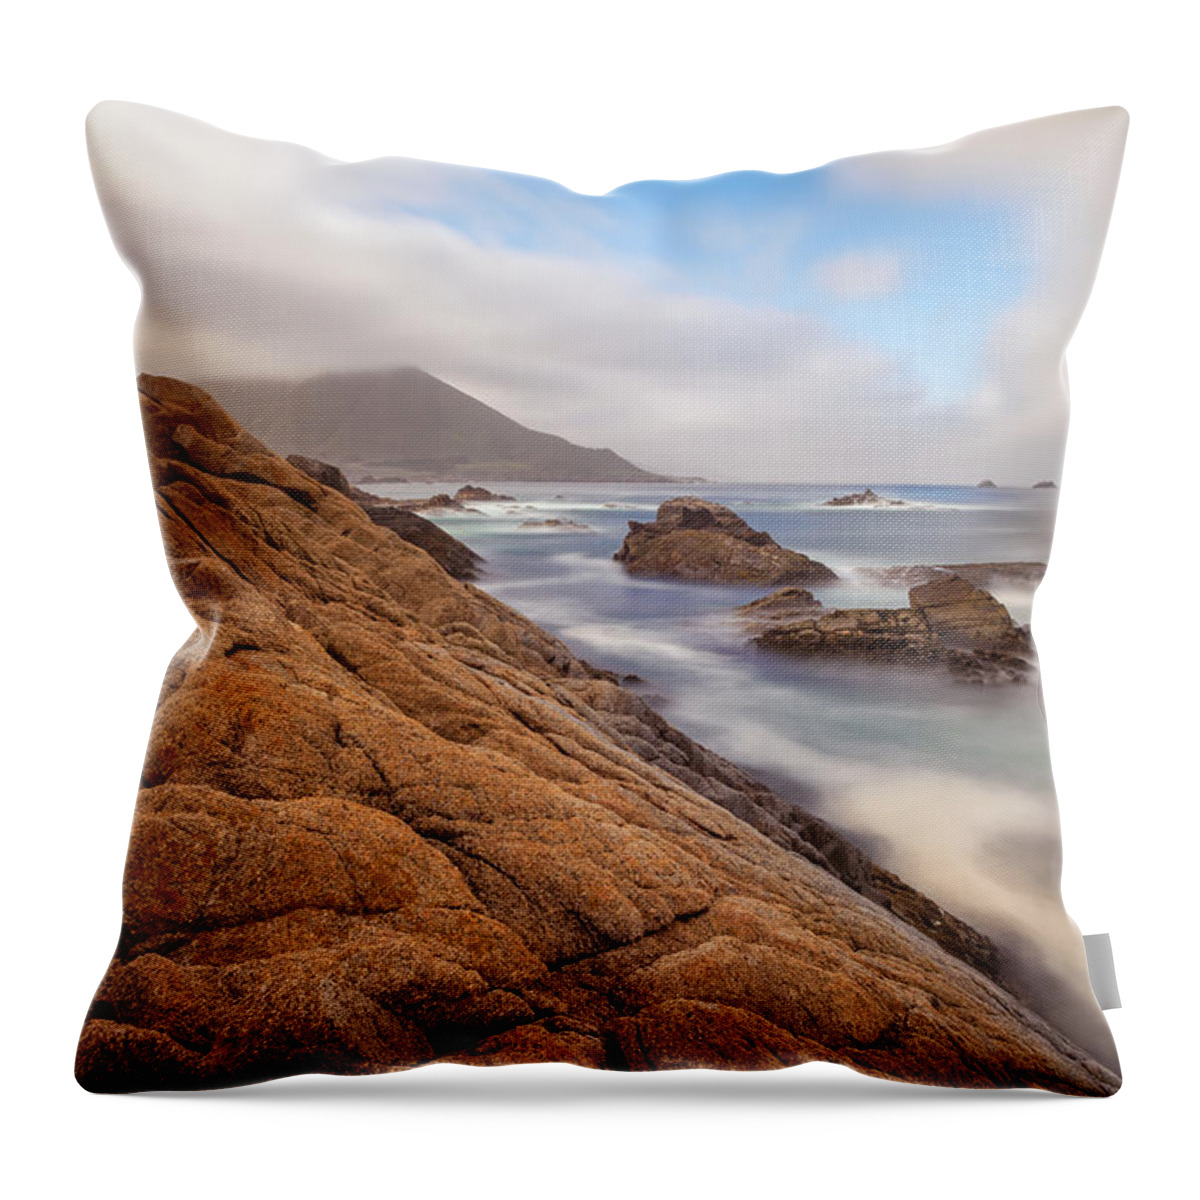 American Landscapes Throw Pillow featuring the photograph The Clearing by Jonathan Nguyen